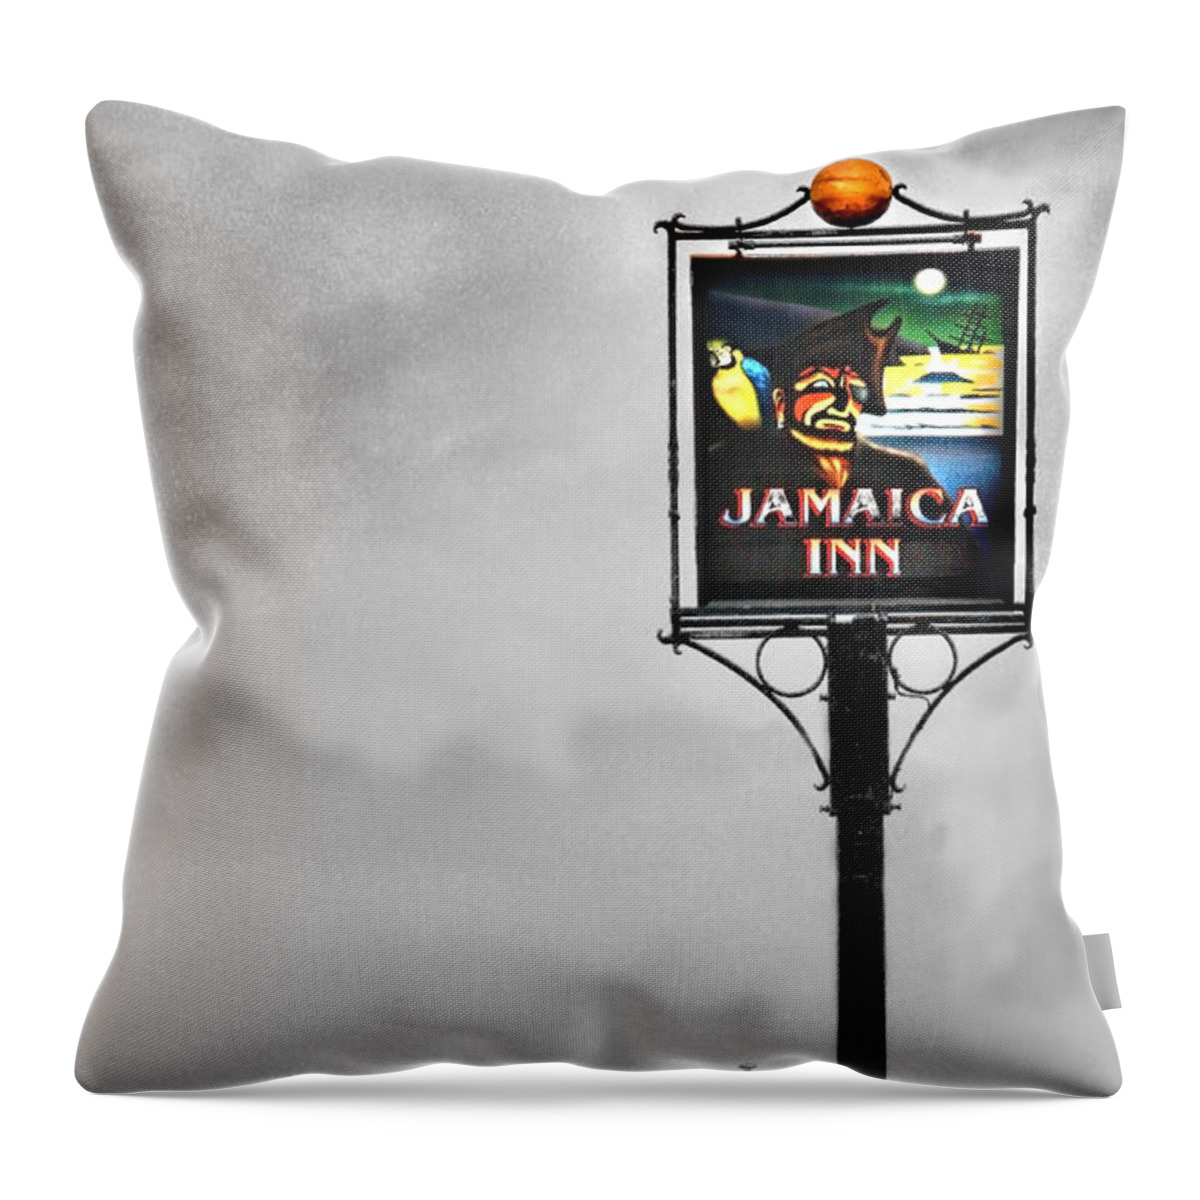 Inns Throw Pillow featuring the photograph Jamaica Inn Pub Sign by Linsey Williams